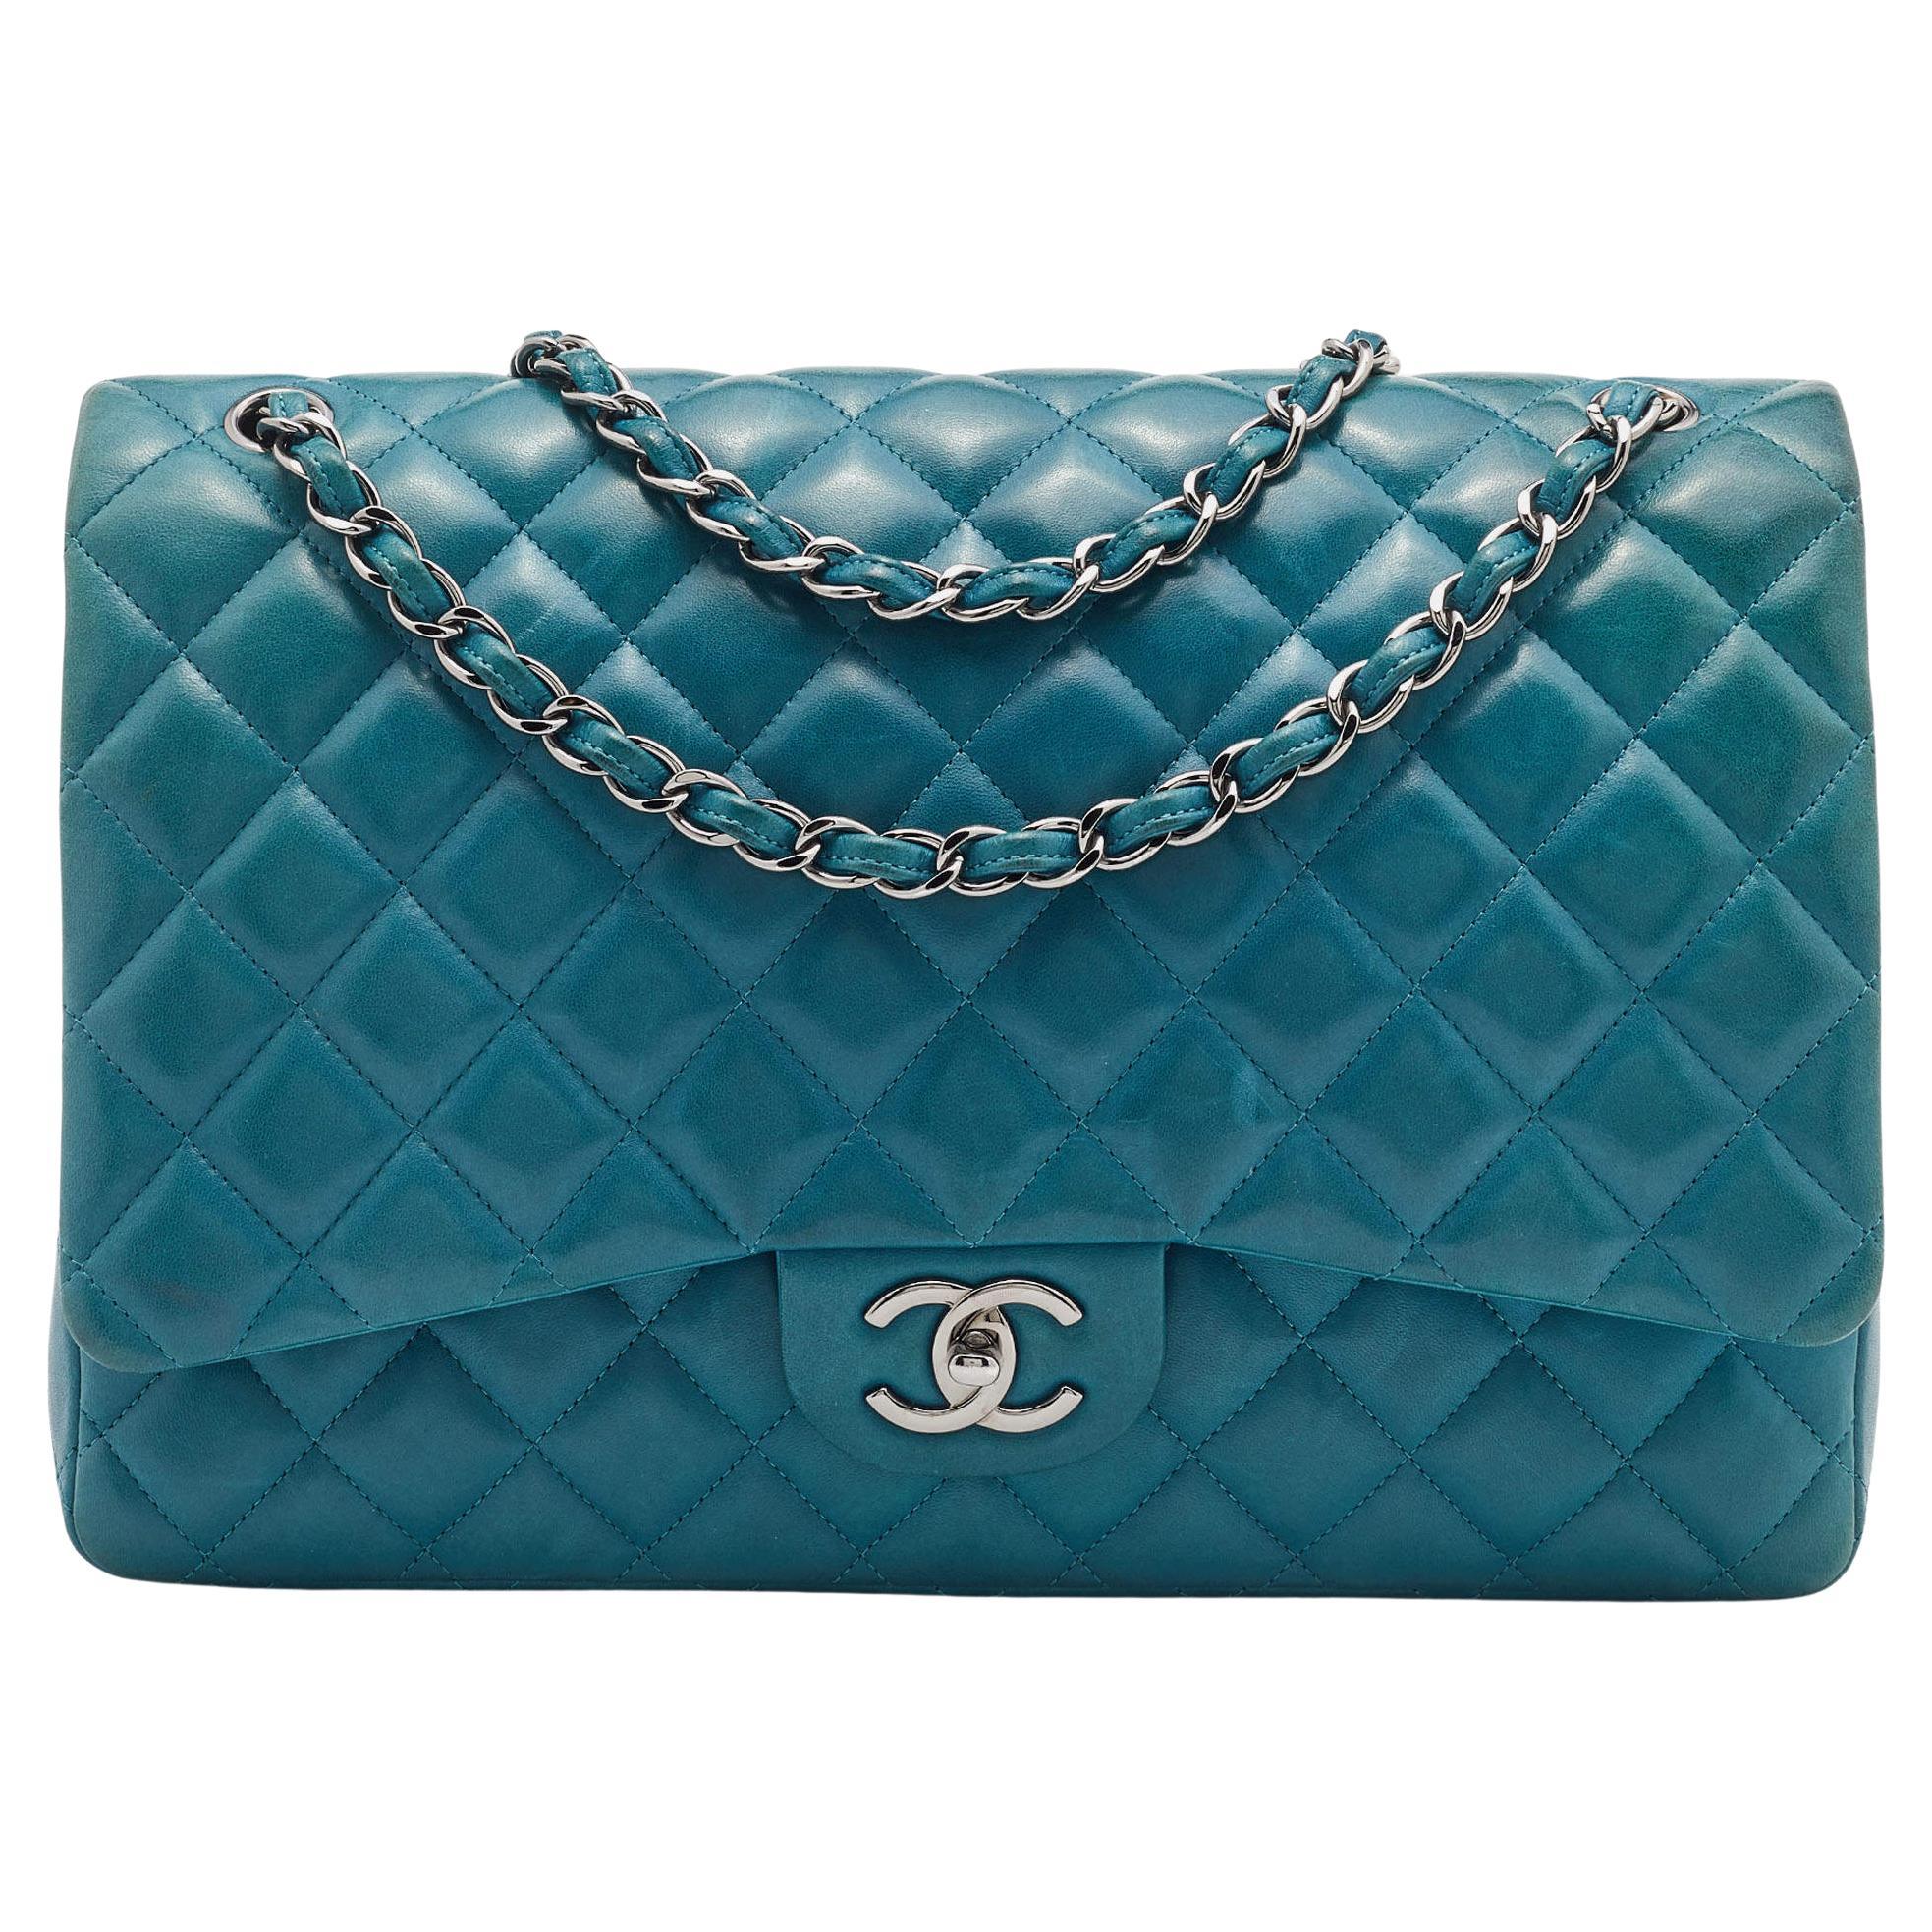 Chanel Green Quilted Leather Maxi Classic Double Flap Bag